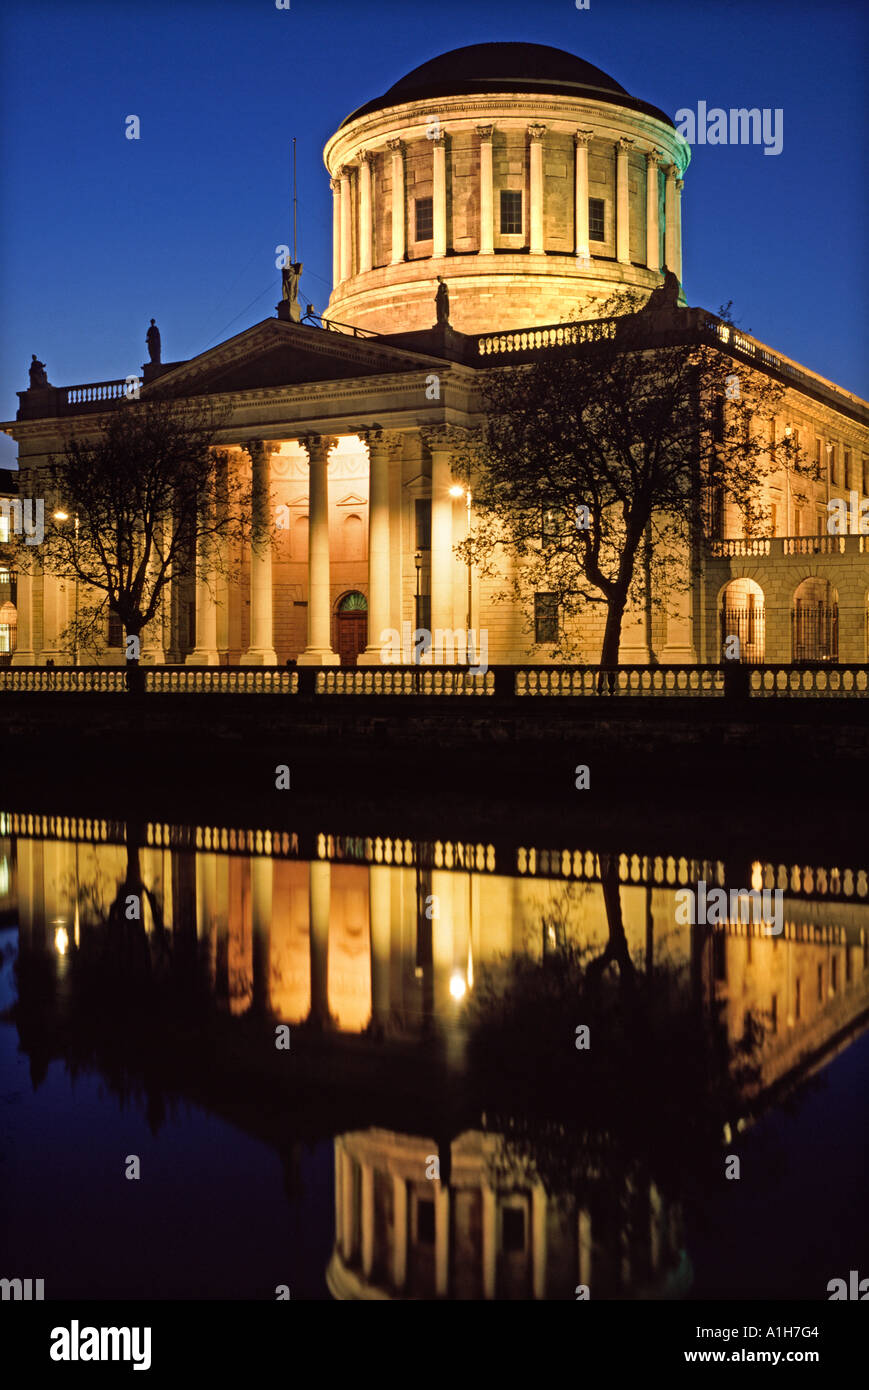 The Four Courts and River Liffey Dublin Ireland Stock Photo